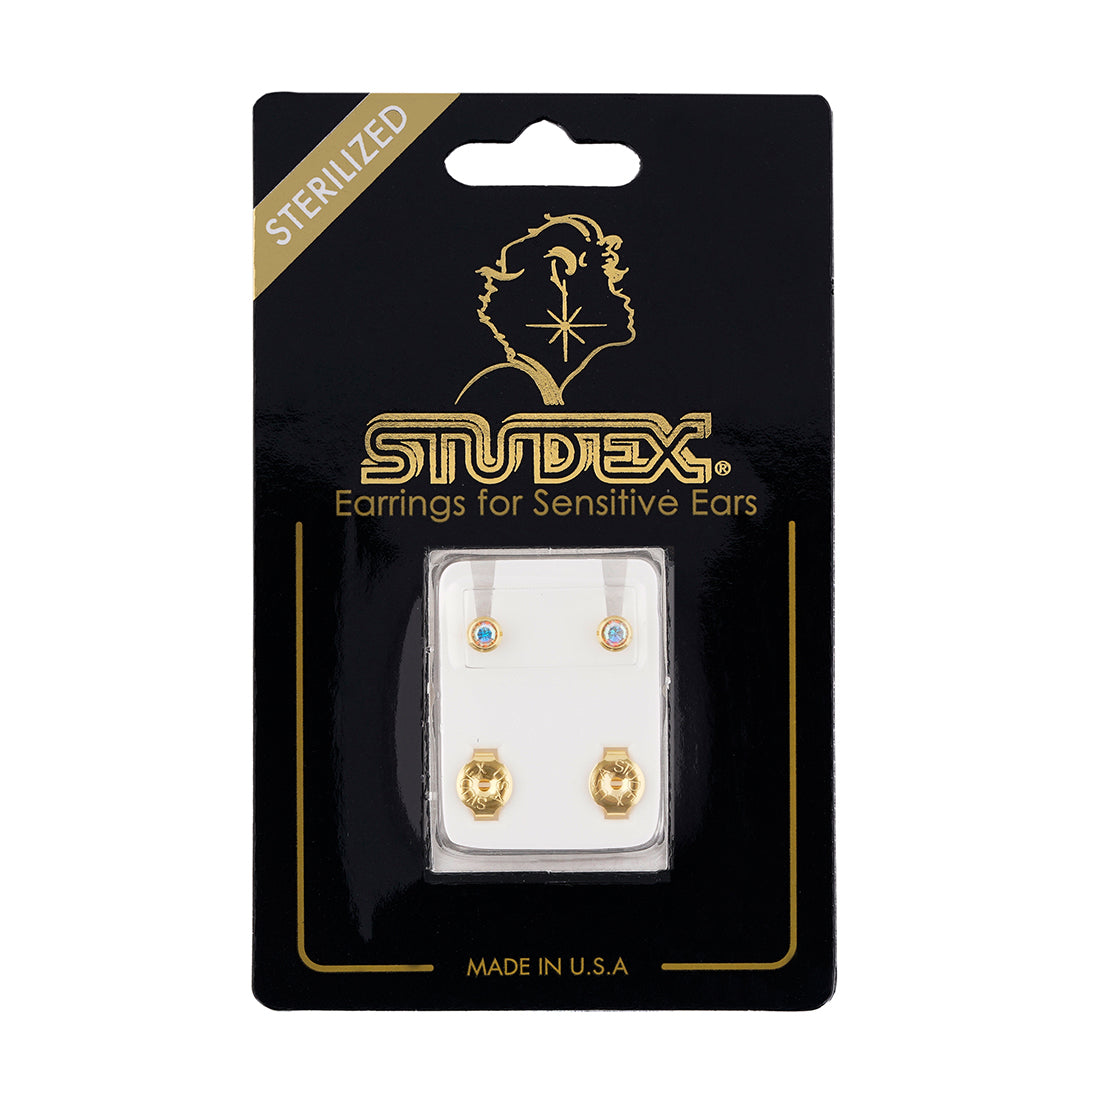 3MM Rainbow Crystal Bezel 24K Pure Gold Plated Ear Studs | MADE IN USA | Ideal for everyday wear